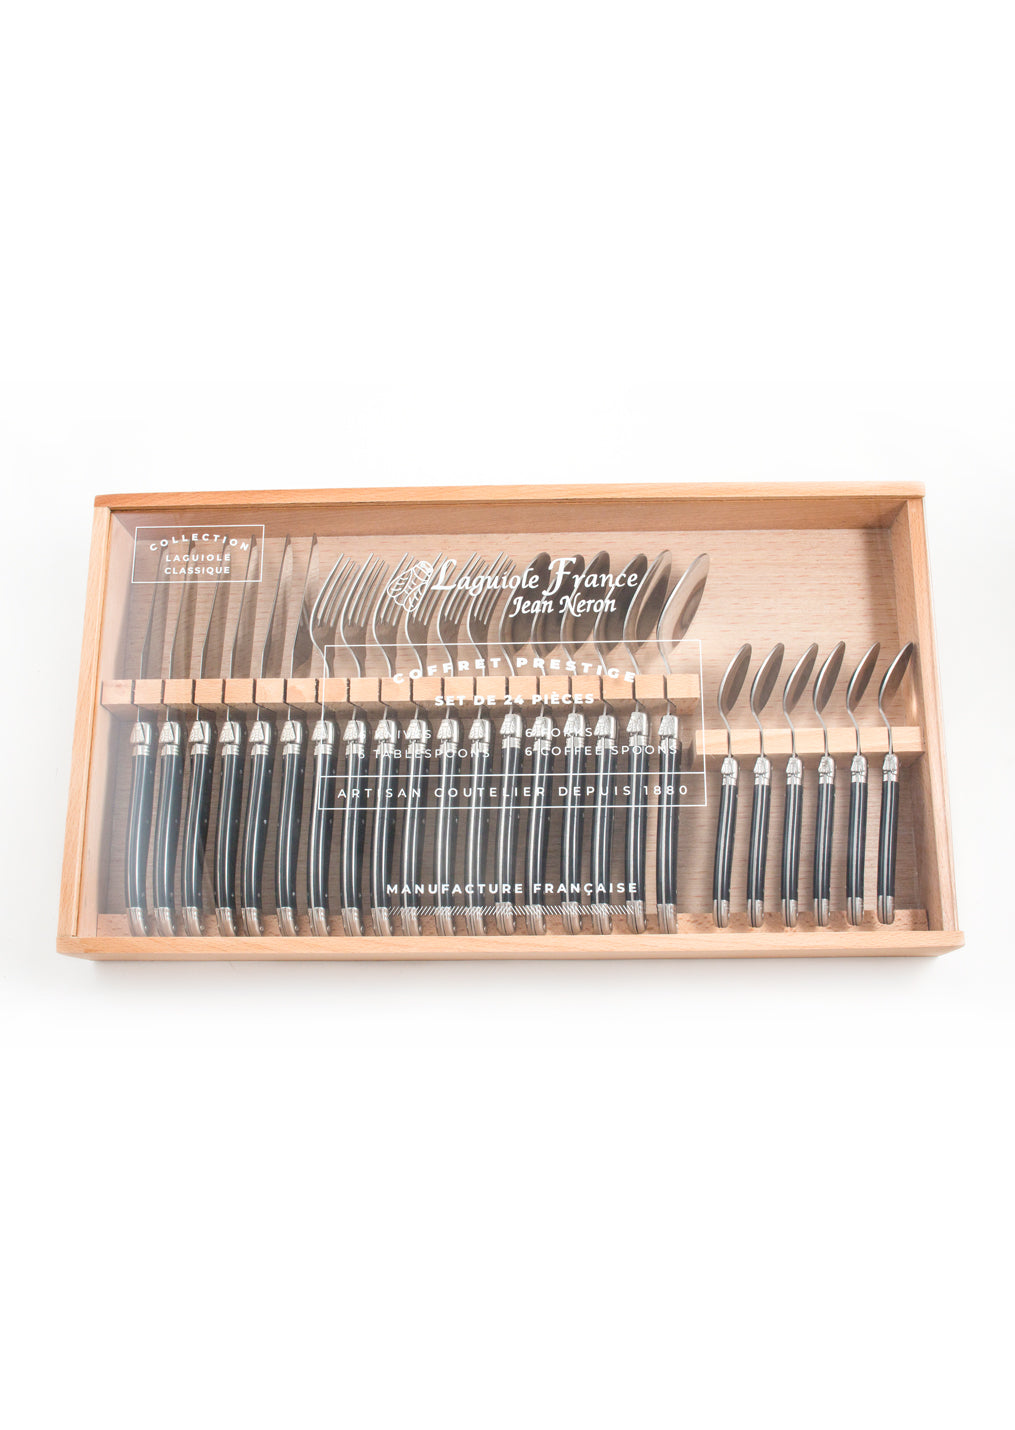 Laguiole Black Flatware in Wooden Box with Acrylic Lid (Set of 24) Cutlery Set Laguiole Brand_Laguiole Knife Sets Laguiole Spring Collection 7900-54000W_BLK_AL